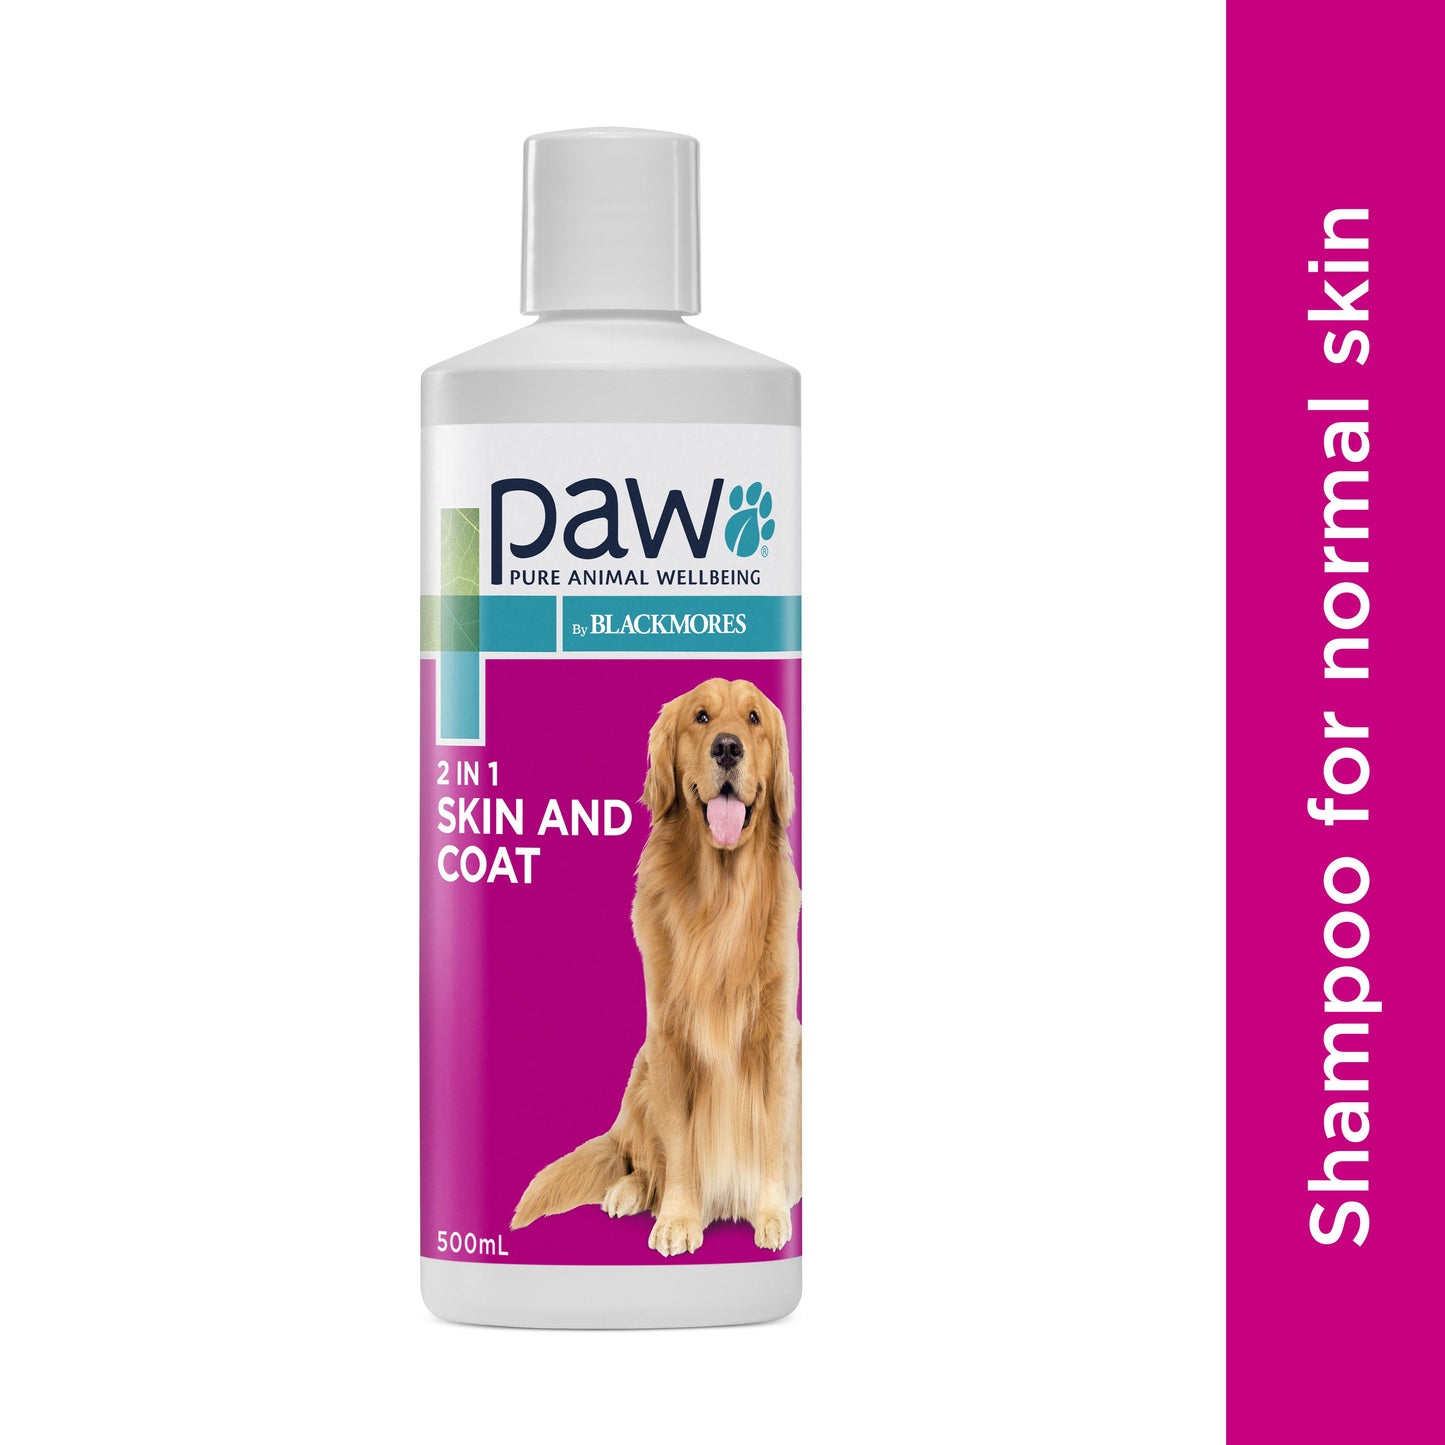 PAW 2 in 1 Conditioning Dog Shampoo 500ml